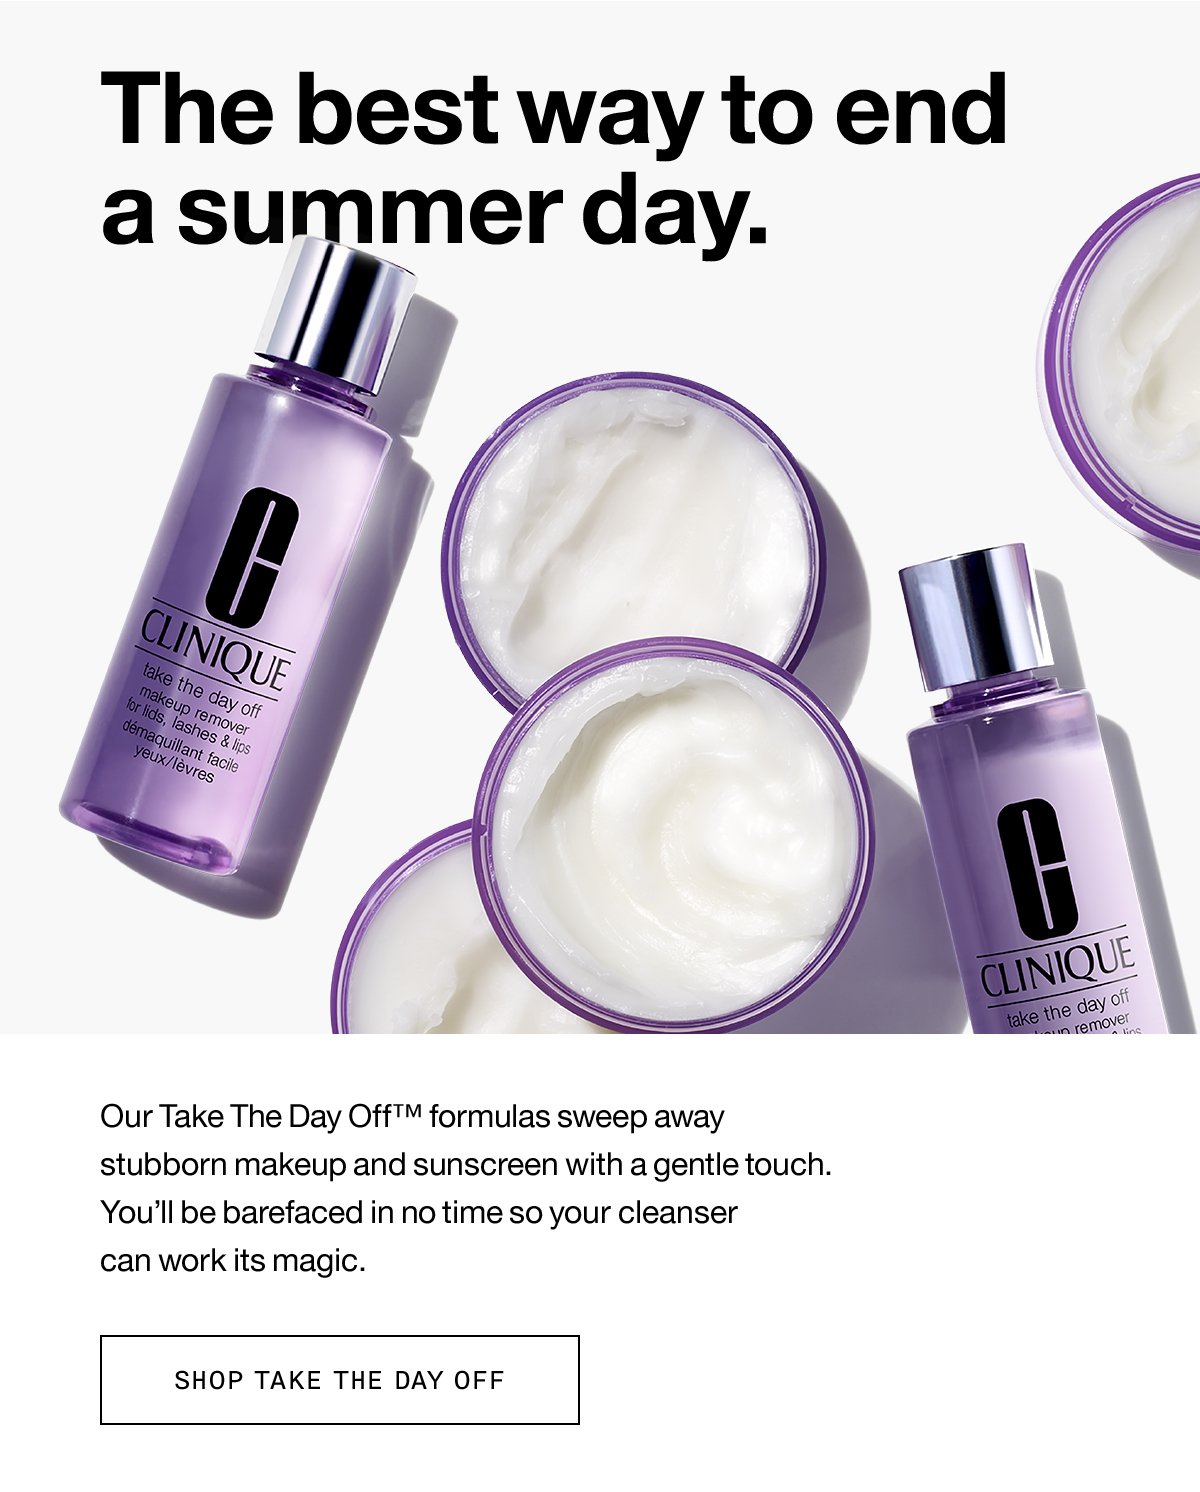 The best way to end a summer day. Our Take The Day Off™ formulas sweep away stubborn makeup and sunscreen with a gentle touch. You'll be barefaced in no time so your cleanser can work its magic. SHOP TAKE THE DAY OFF